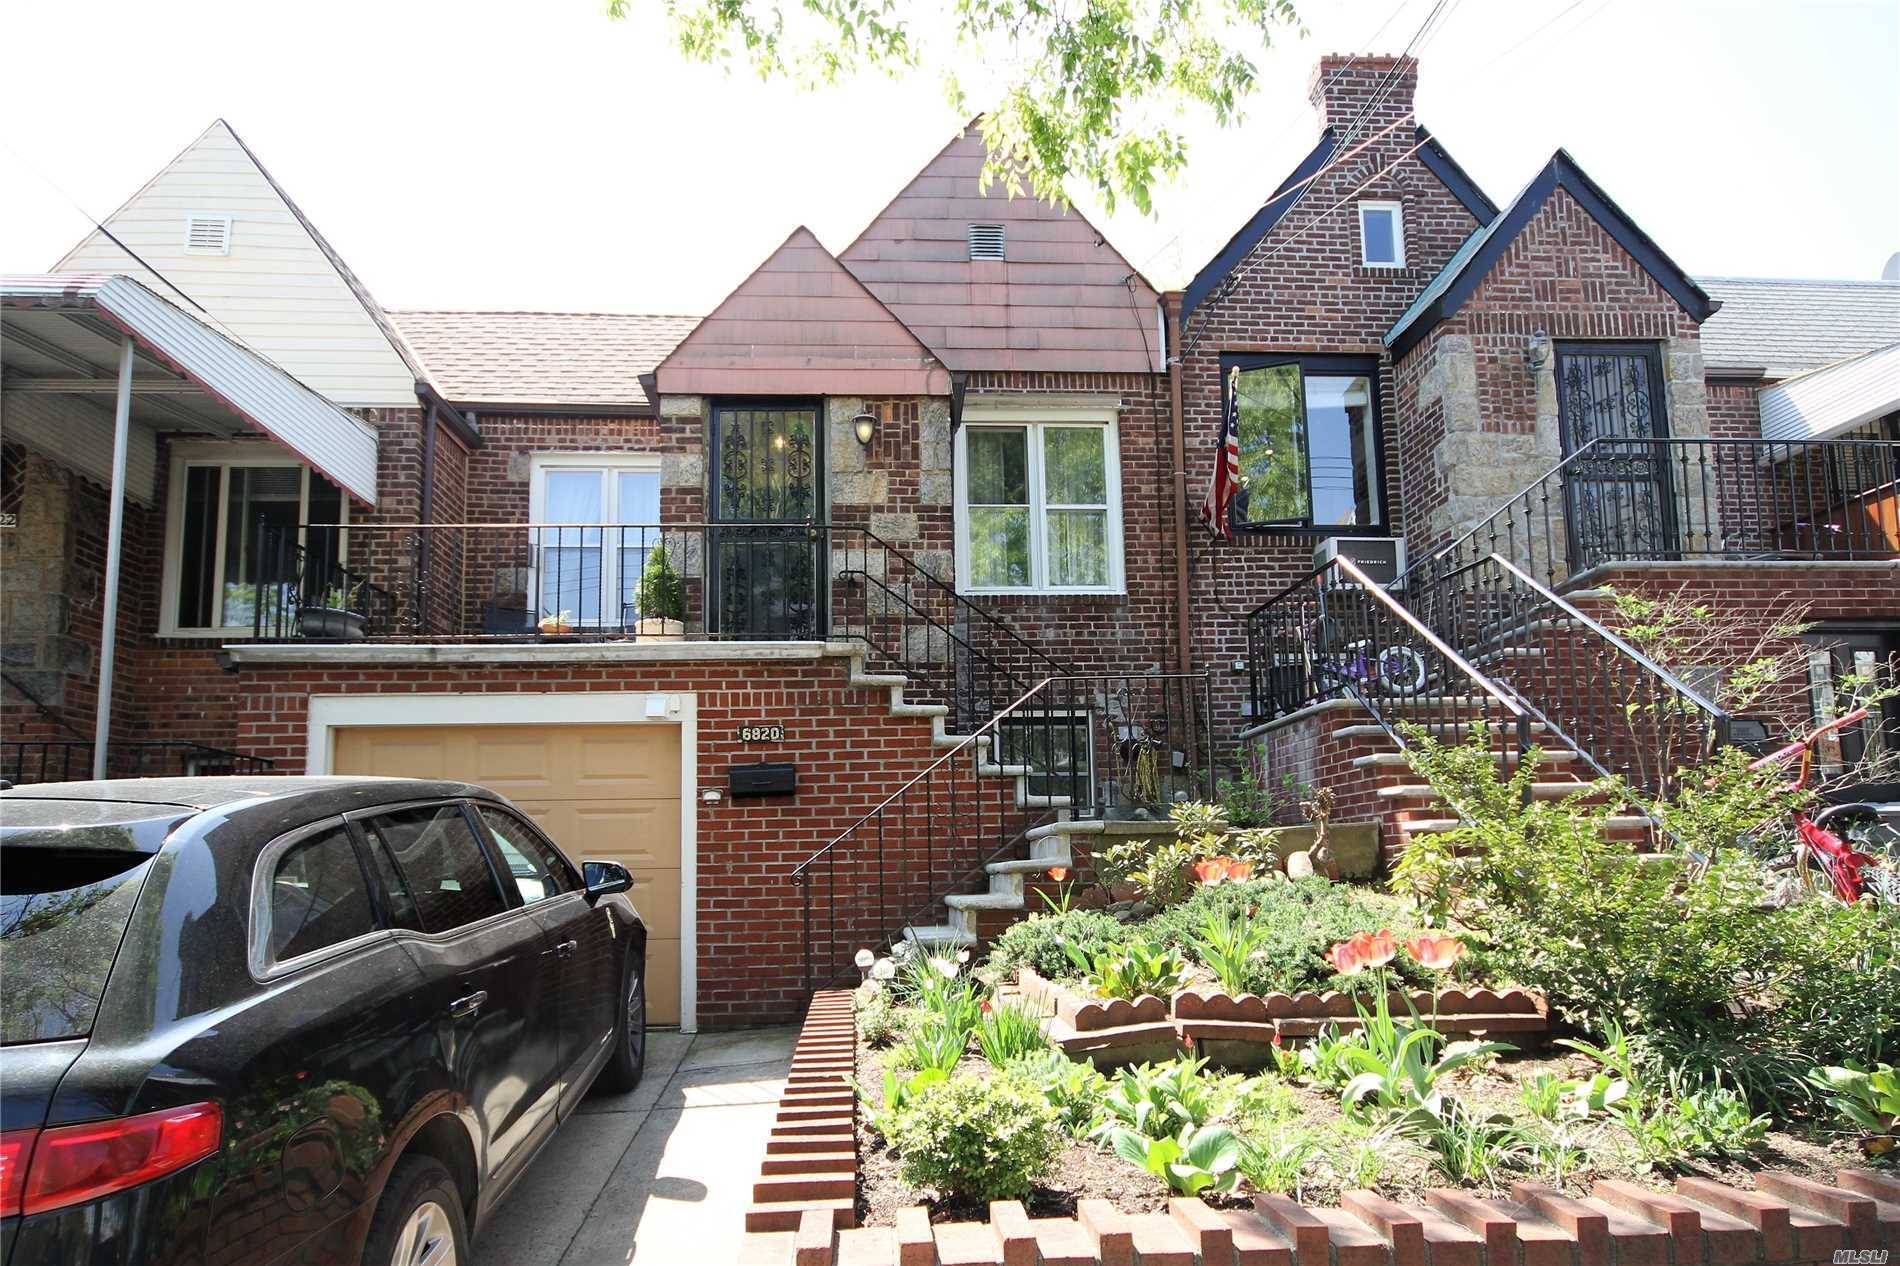 Maspeth, brick attached, 2 bedroom ranch with 1 car attached garage and private driveway.